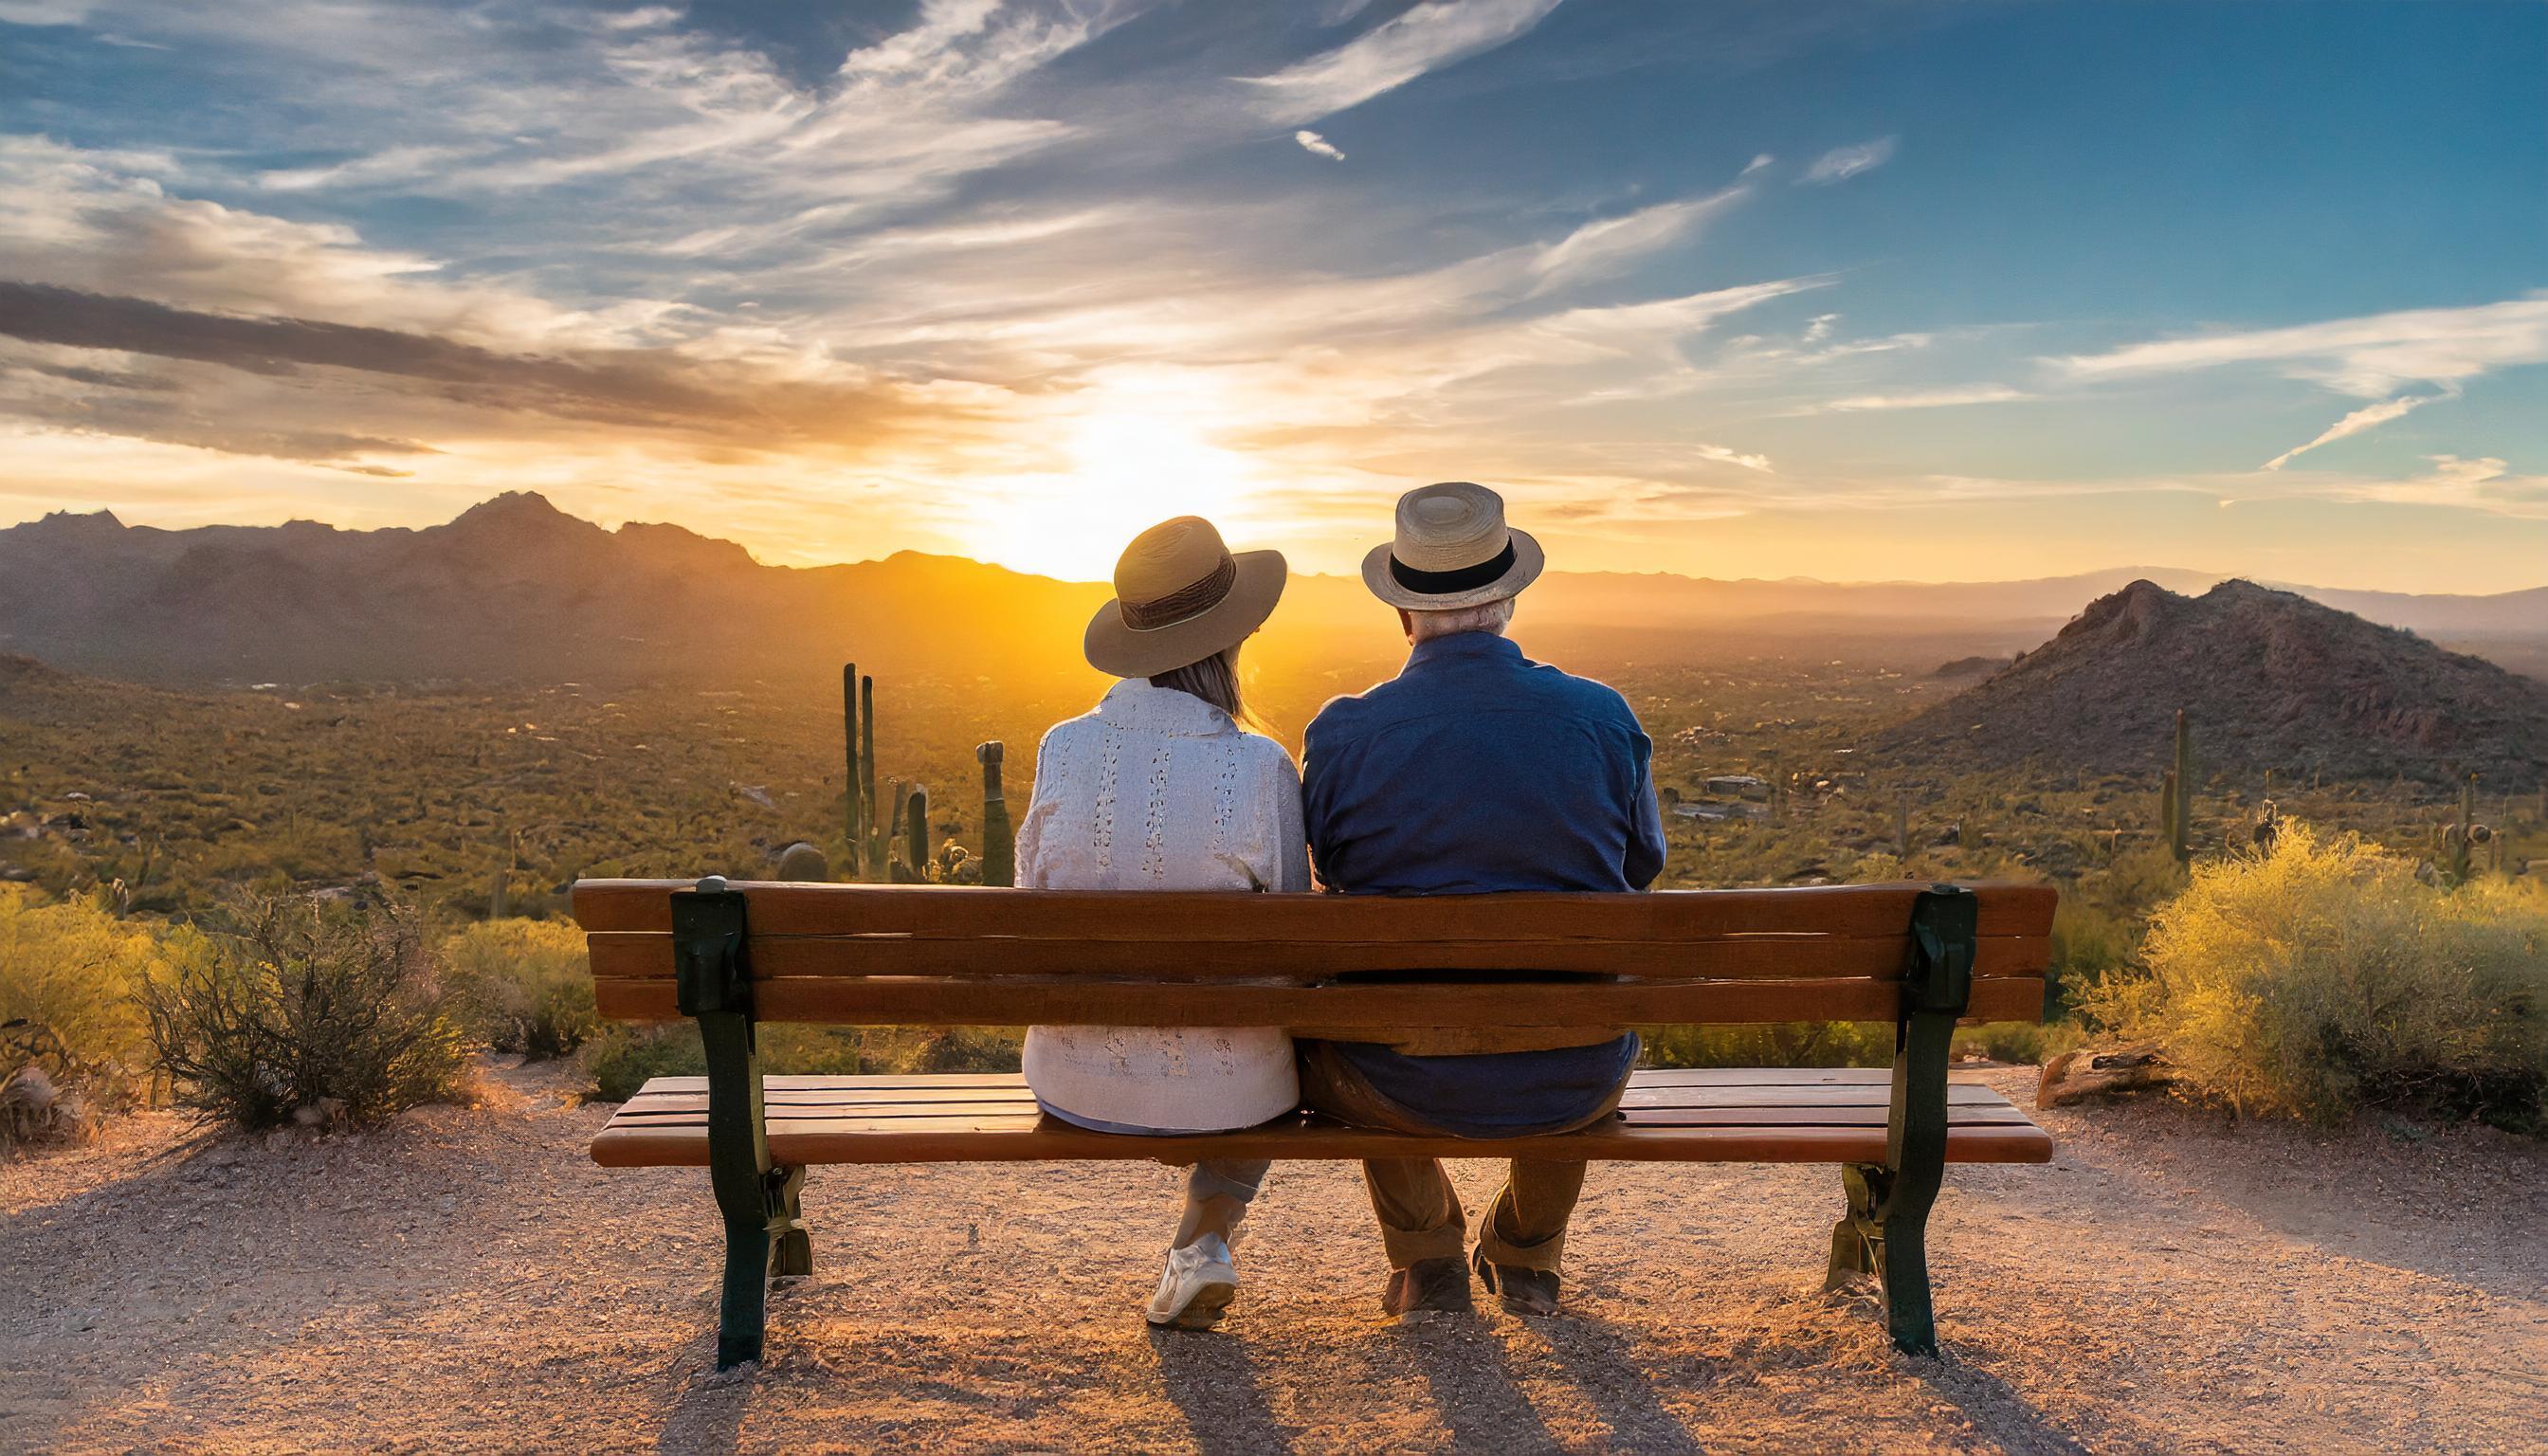 Older couple from behind sitting on a bench overlooking the Sonoran desert at sunset